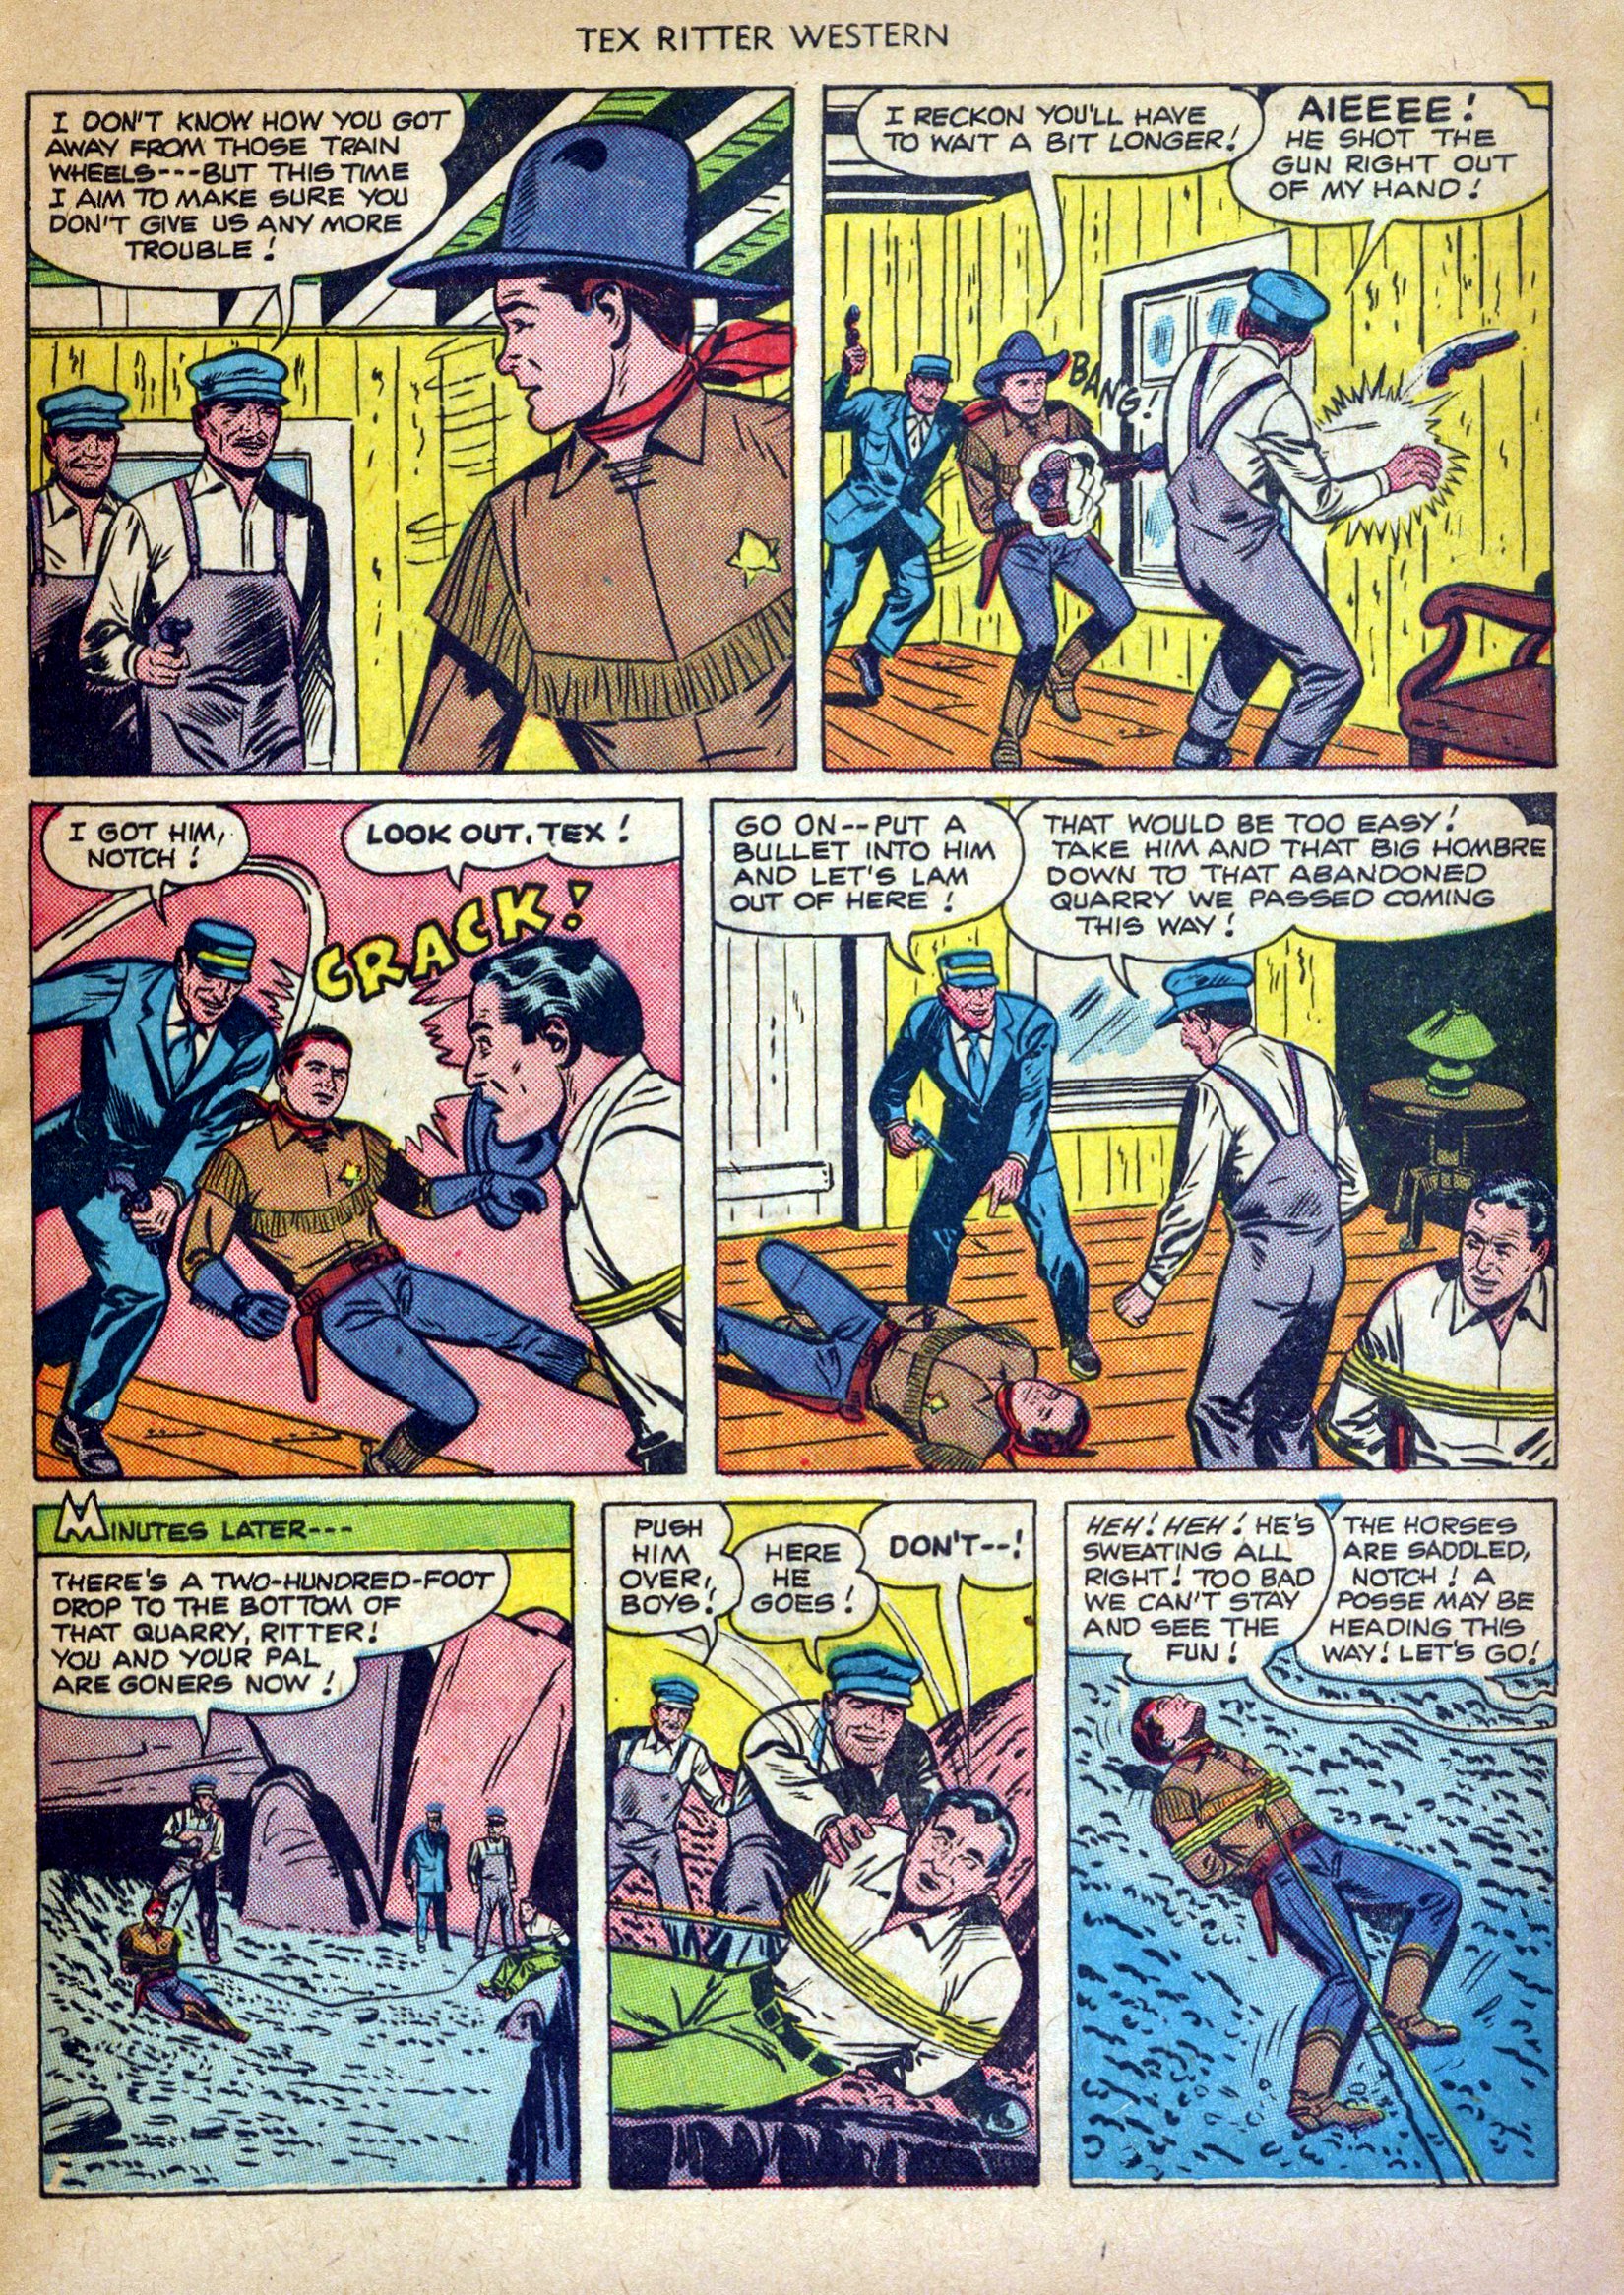 Read online Tex Ritter Western comic -  Issue #4 - 9